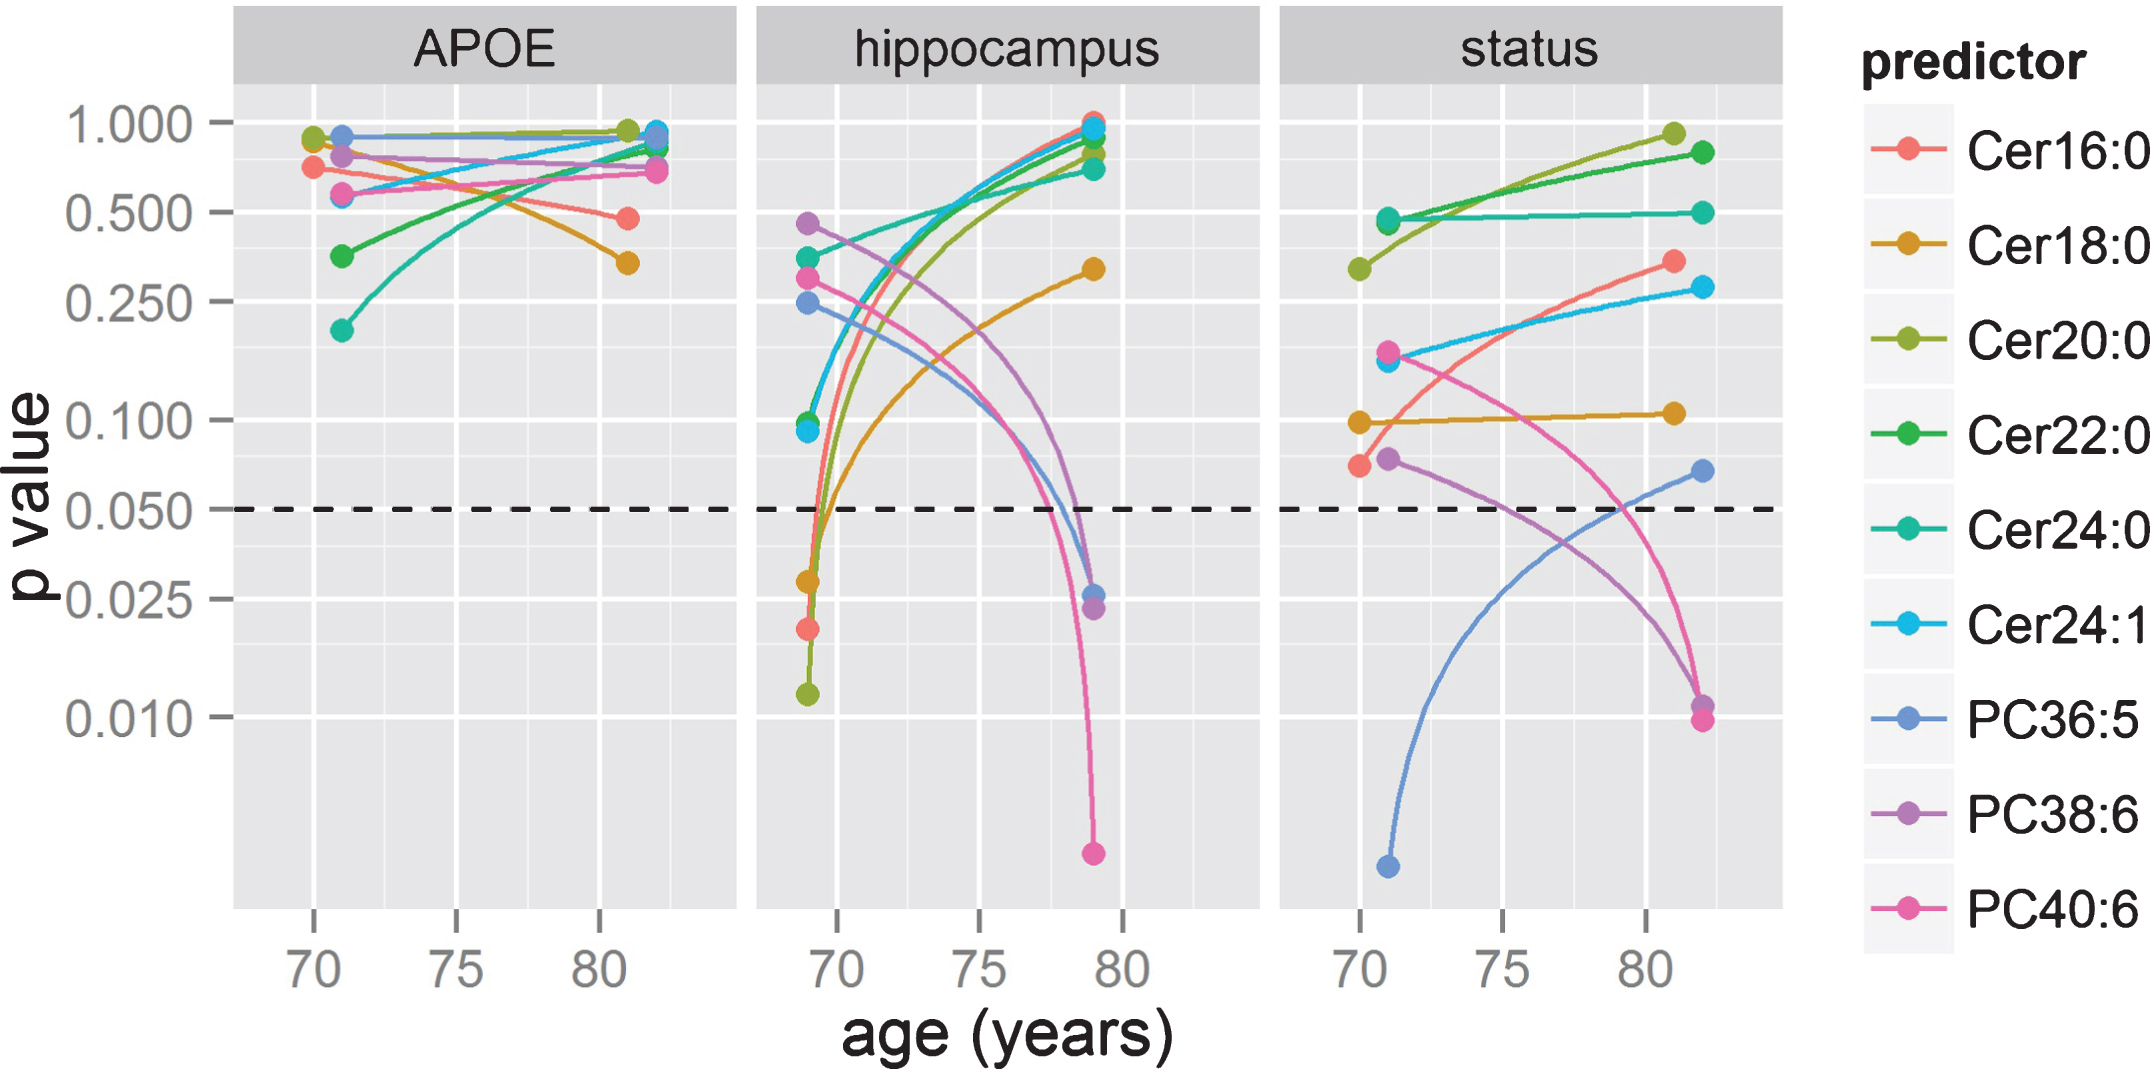 Time or age-bin analyses. GLM were applied in two age bins to statistical significance of effects between lipids and three target variables (APOE status, hippocampal volume, and AD diagnosis) based on GLM models. p-values are shown in log scale, with dotted lines representing the p = 0.05 threshold.